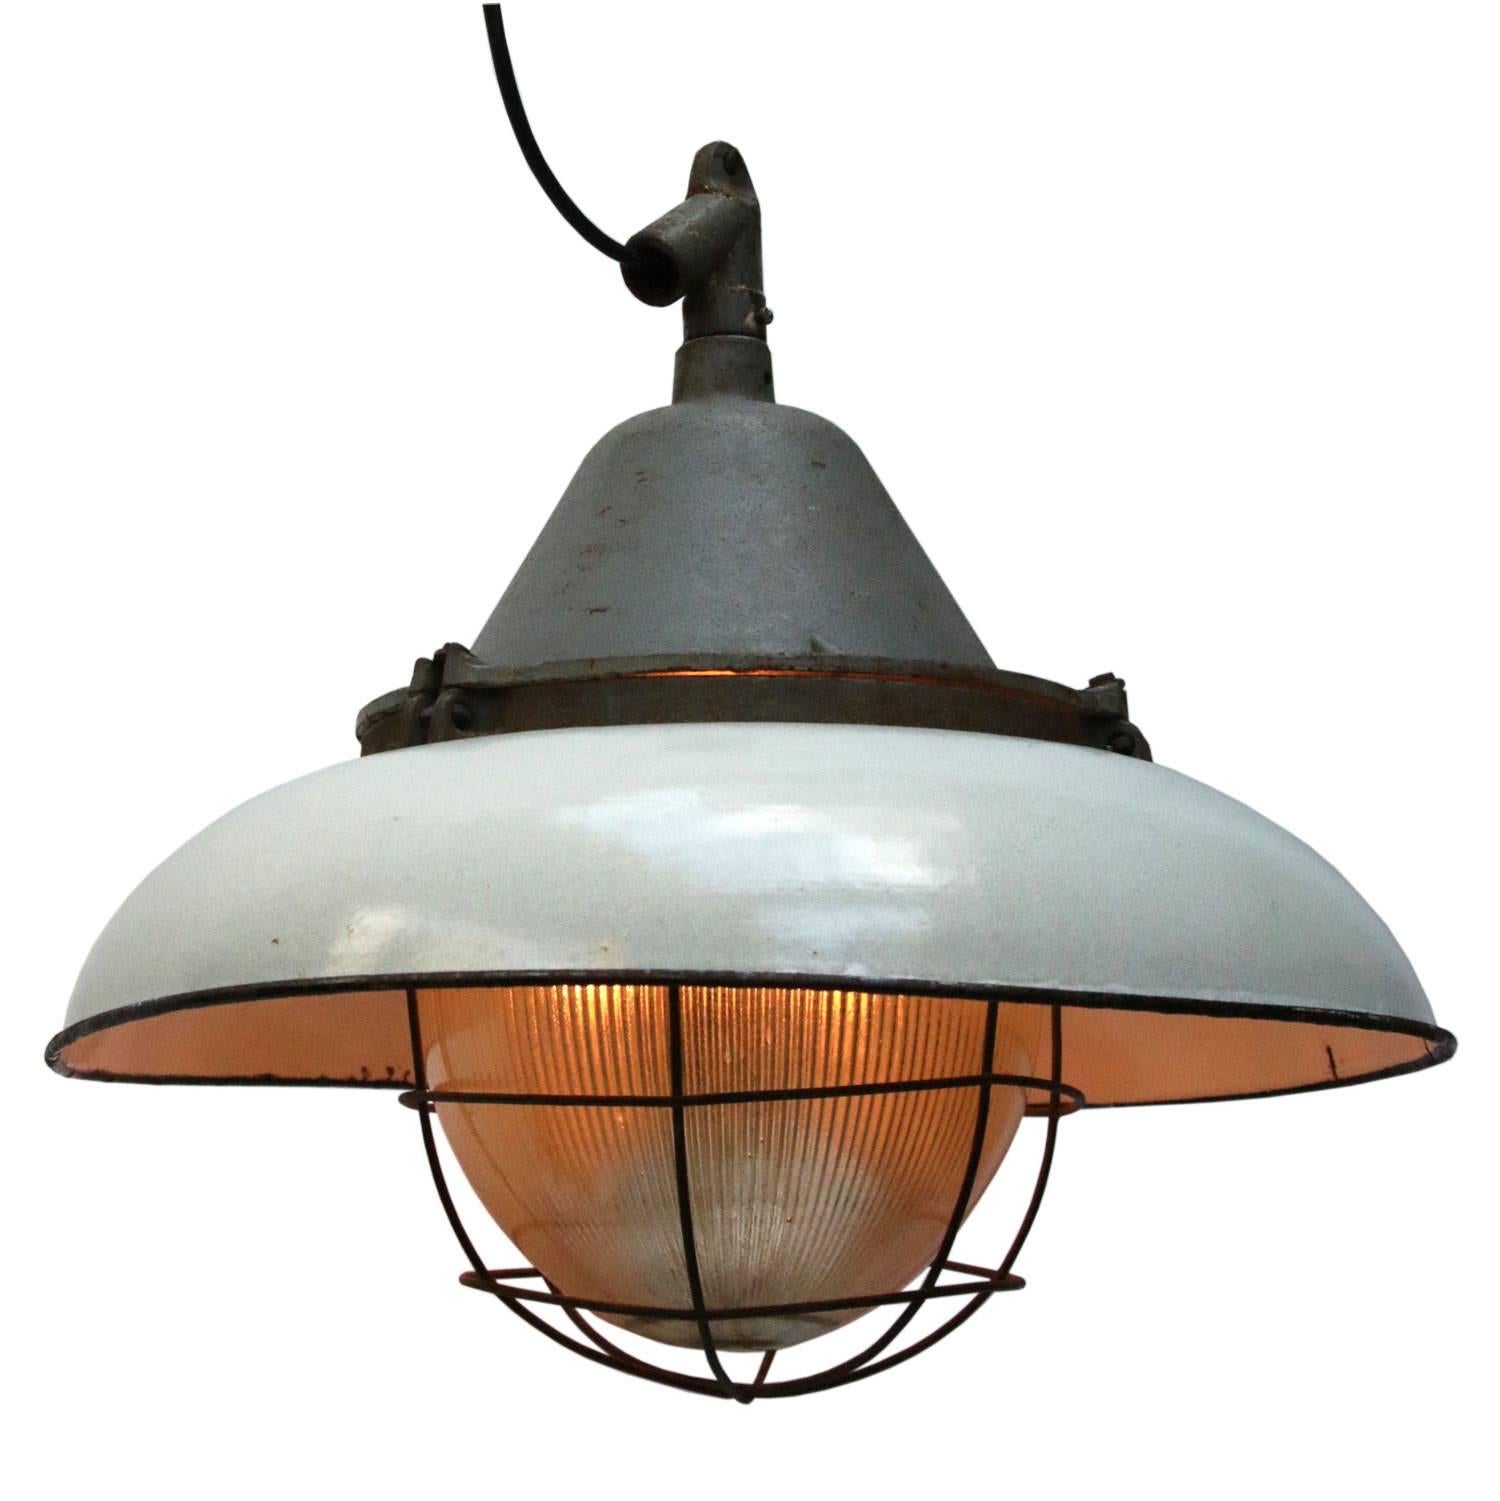 Factory pendant. White enamel white interior. Cast iron top.
Holophane glass.

Weight: 9.0 kg / 19.8 lb

All lamps have been made suitable by international standards for incandescent light bulbs, energy-efficient and LED bulbs. E26/E27 bulb holders